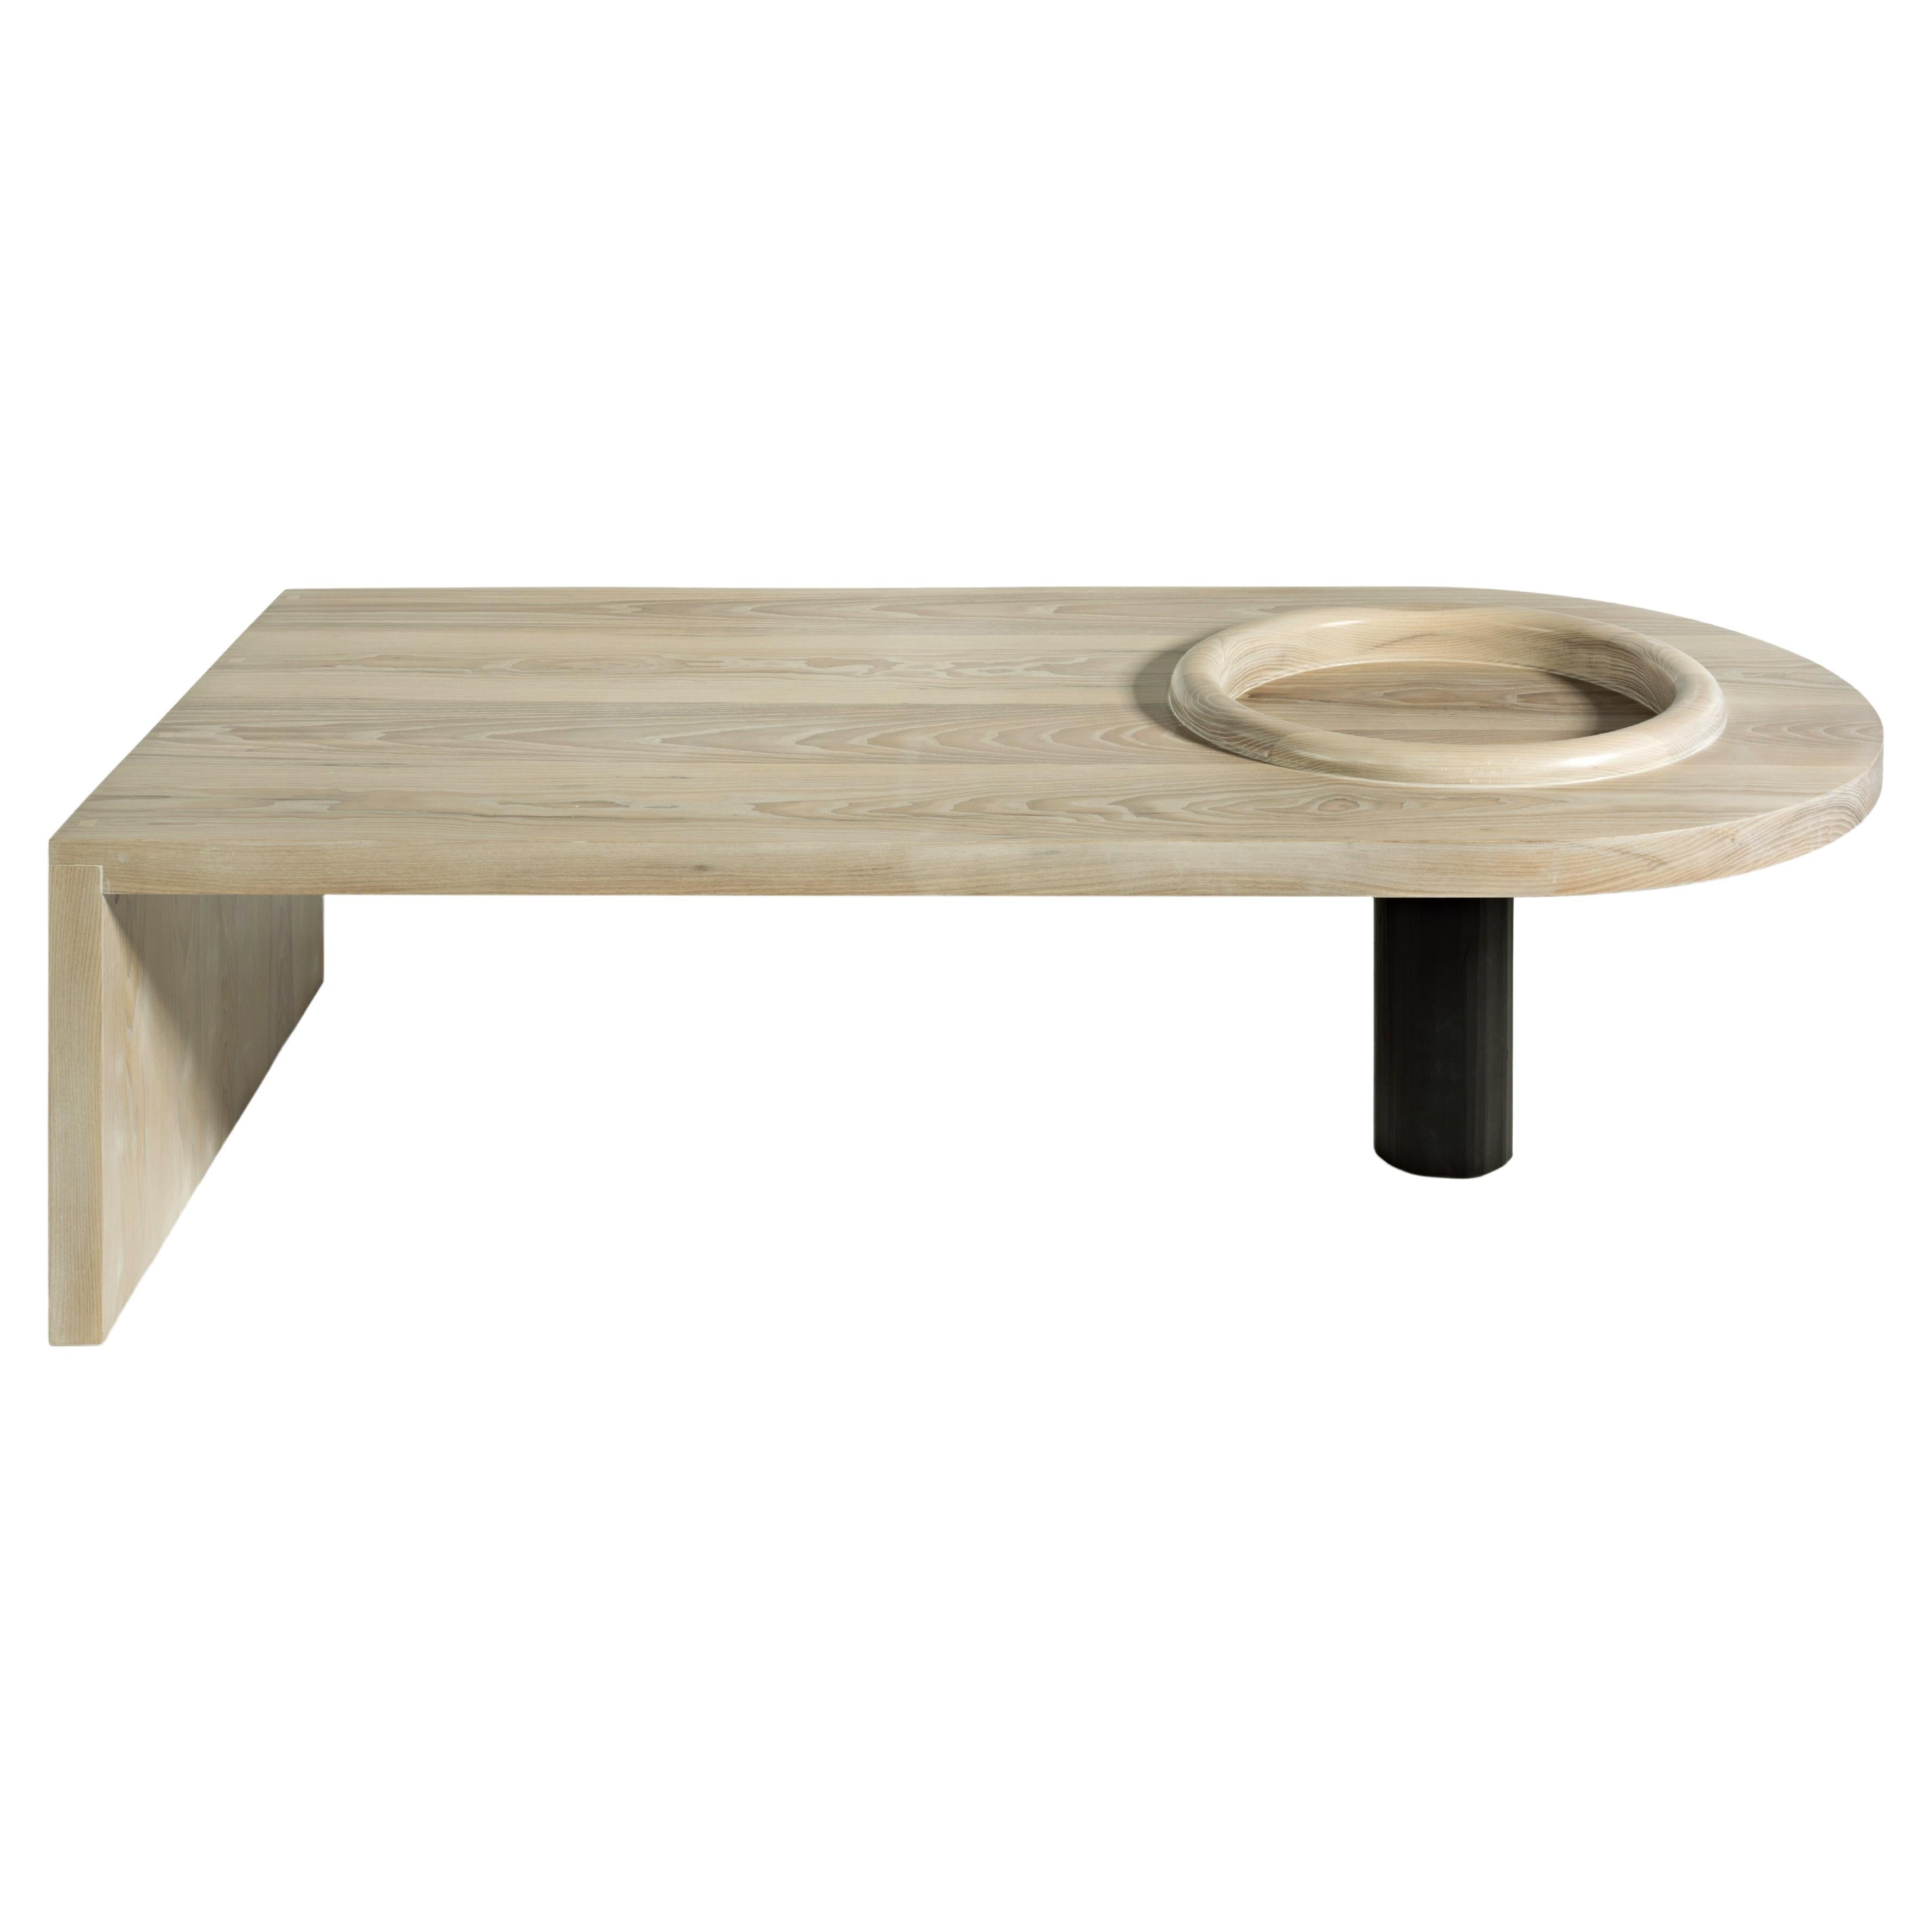 Monolith Slab Table by Phaedo For Sale